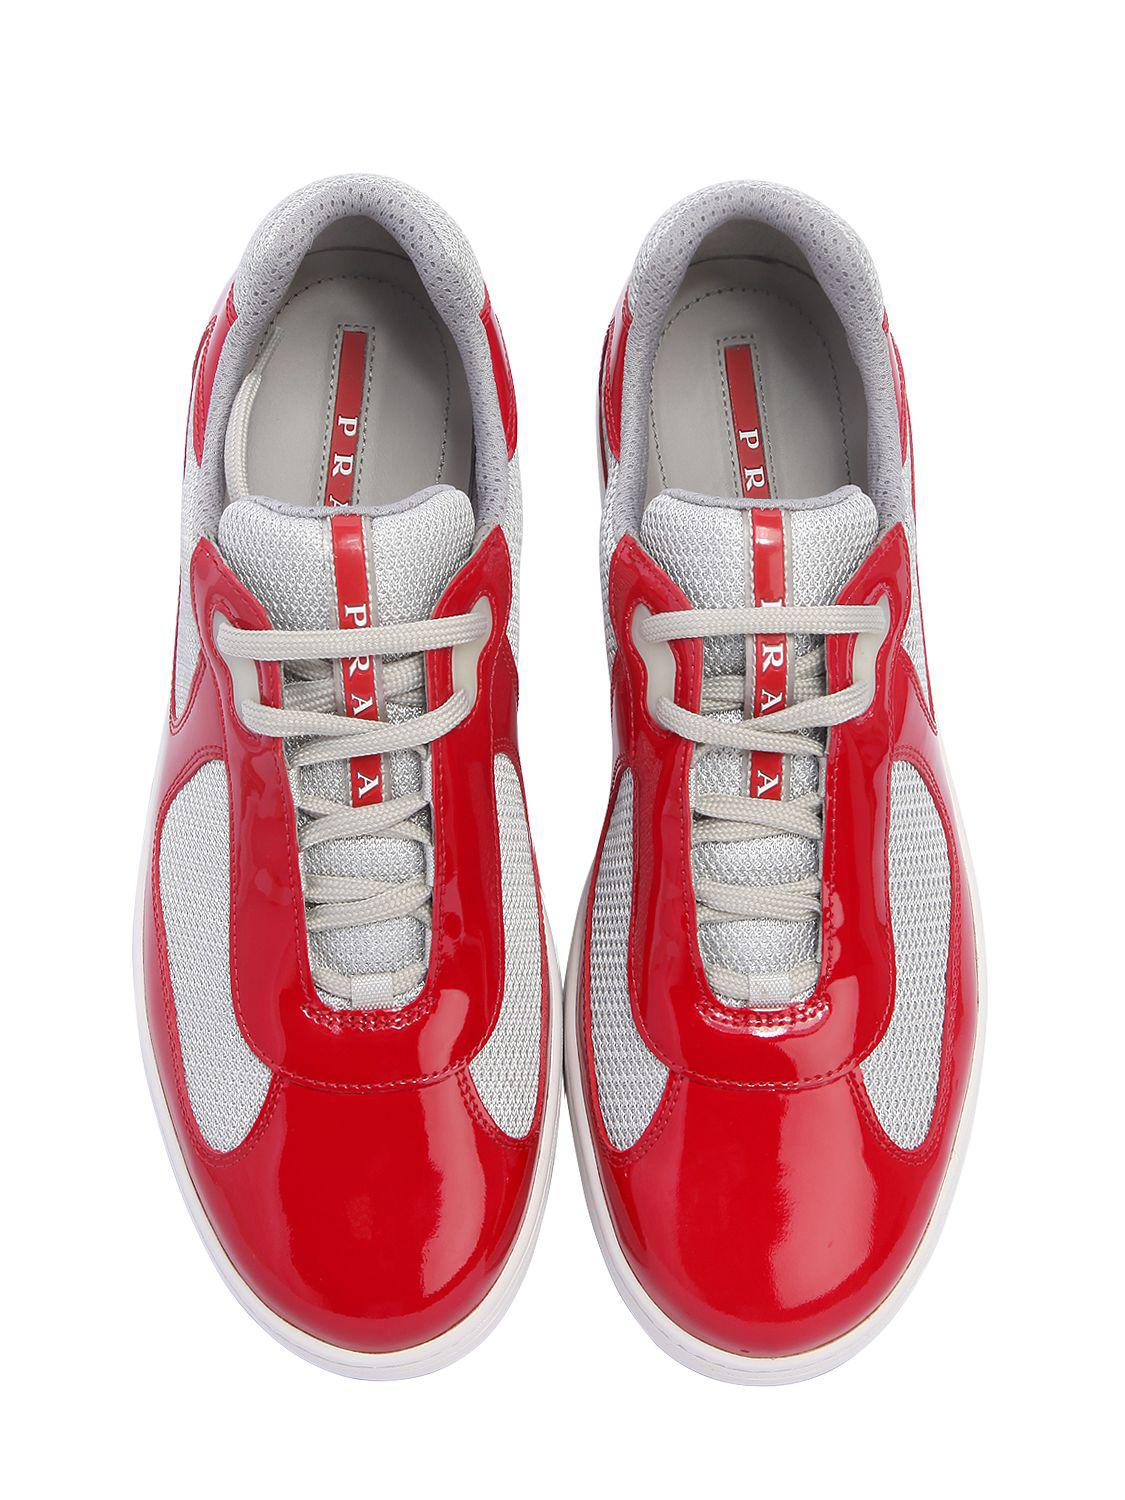 Prada Men's Shoes Leather Trainers Sneakers in Red/Silver (Red) for Men -  Save 71% | Lyst